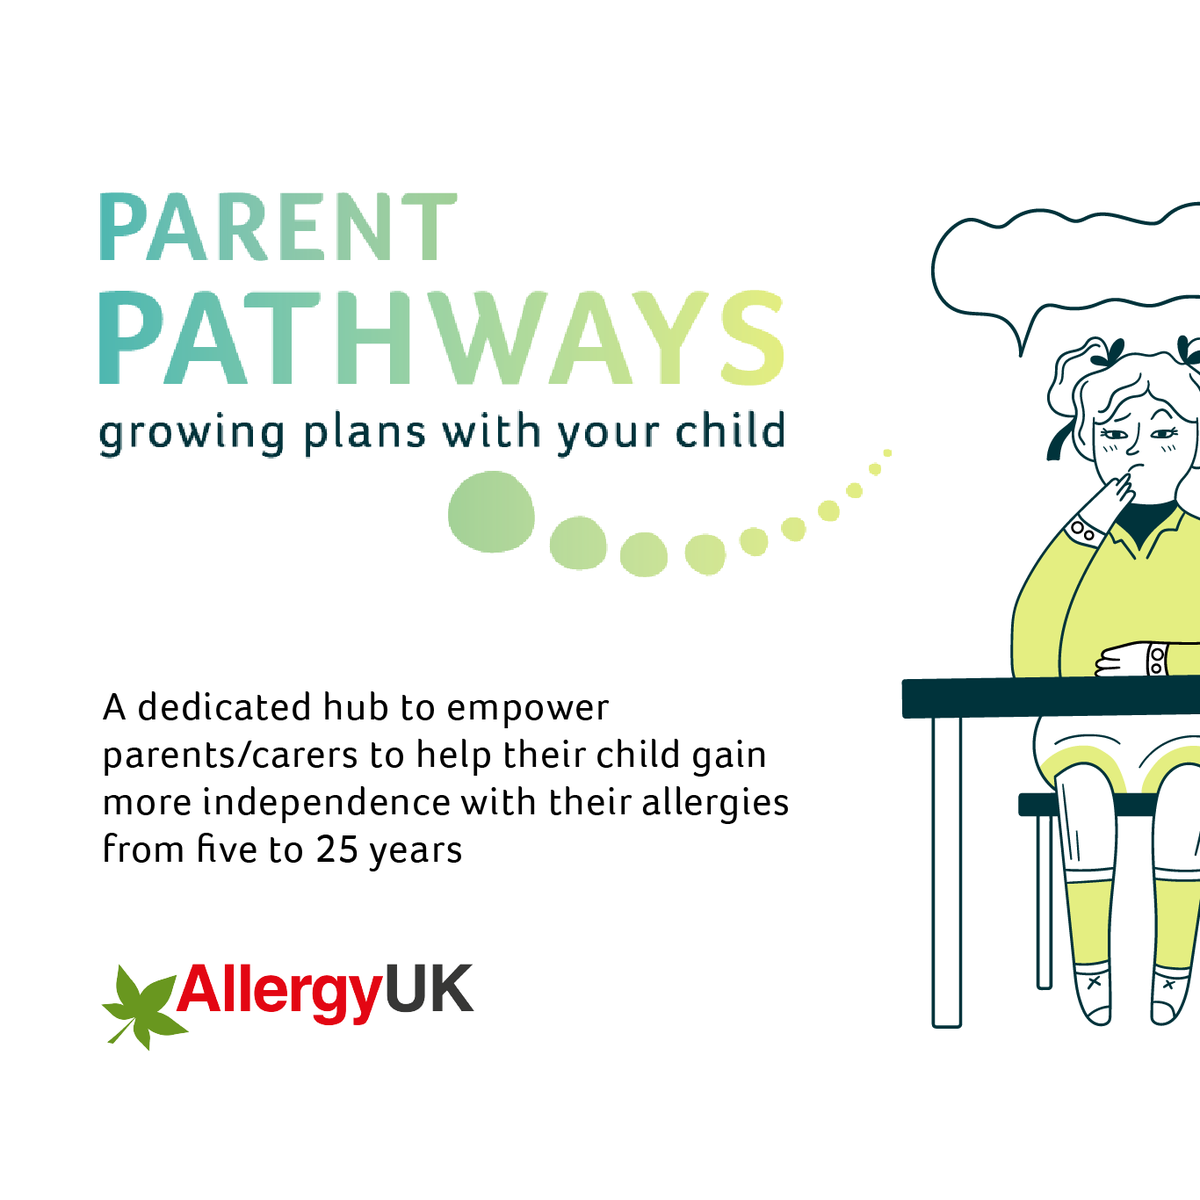 Did you know in the UK, 40% of children have been diagnosed with an allergy? If your child has allergies the you may find that Parent Pathways from @AllergyUK1 is a really handy resource. 
orlo.uk/McrK0

#AllergyAwarenessWeek #FoodAllergies #Asthma #Eczema #Allergy